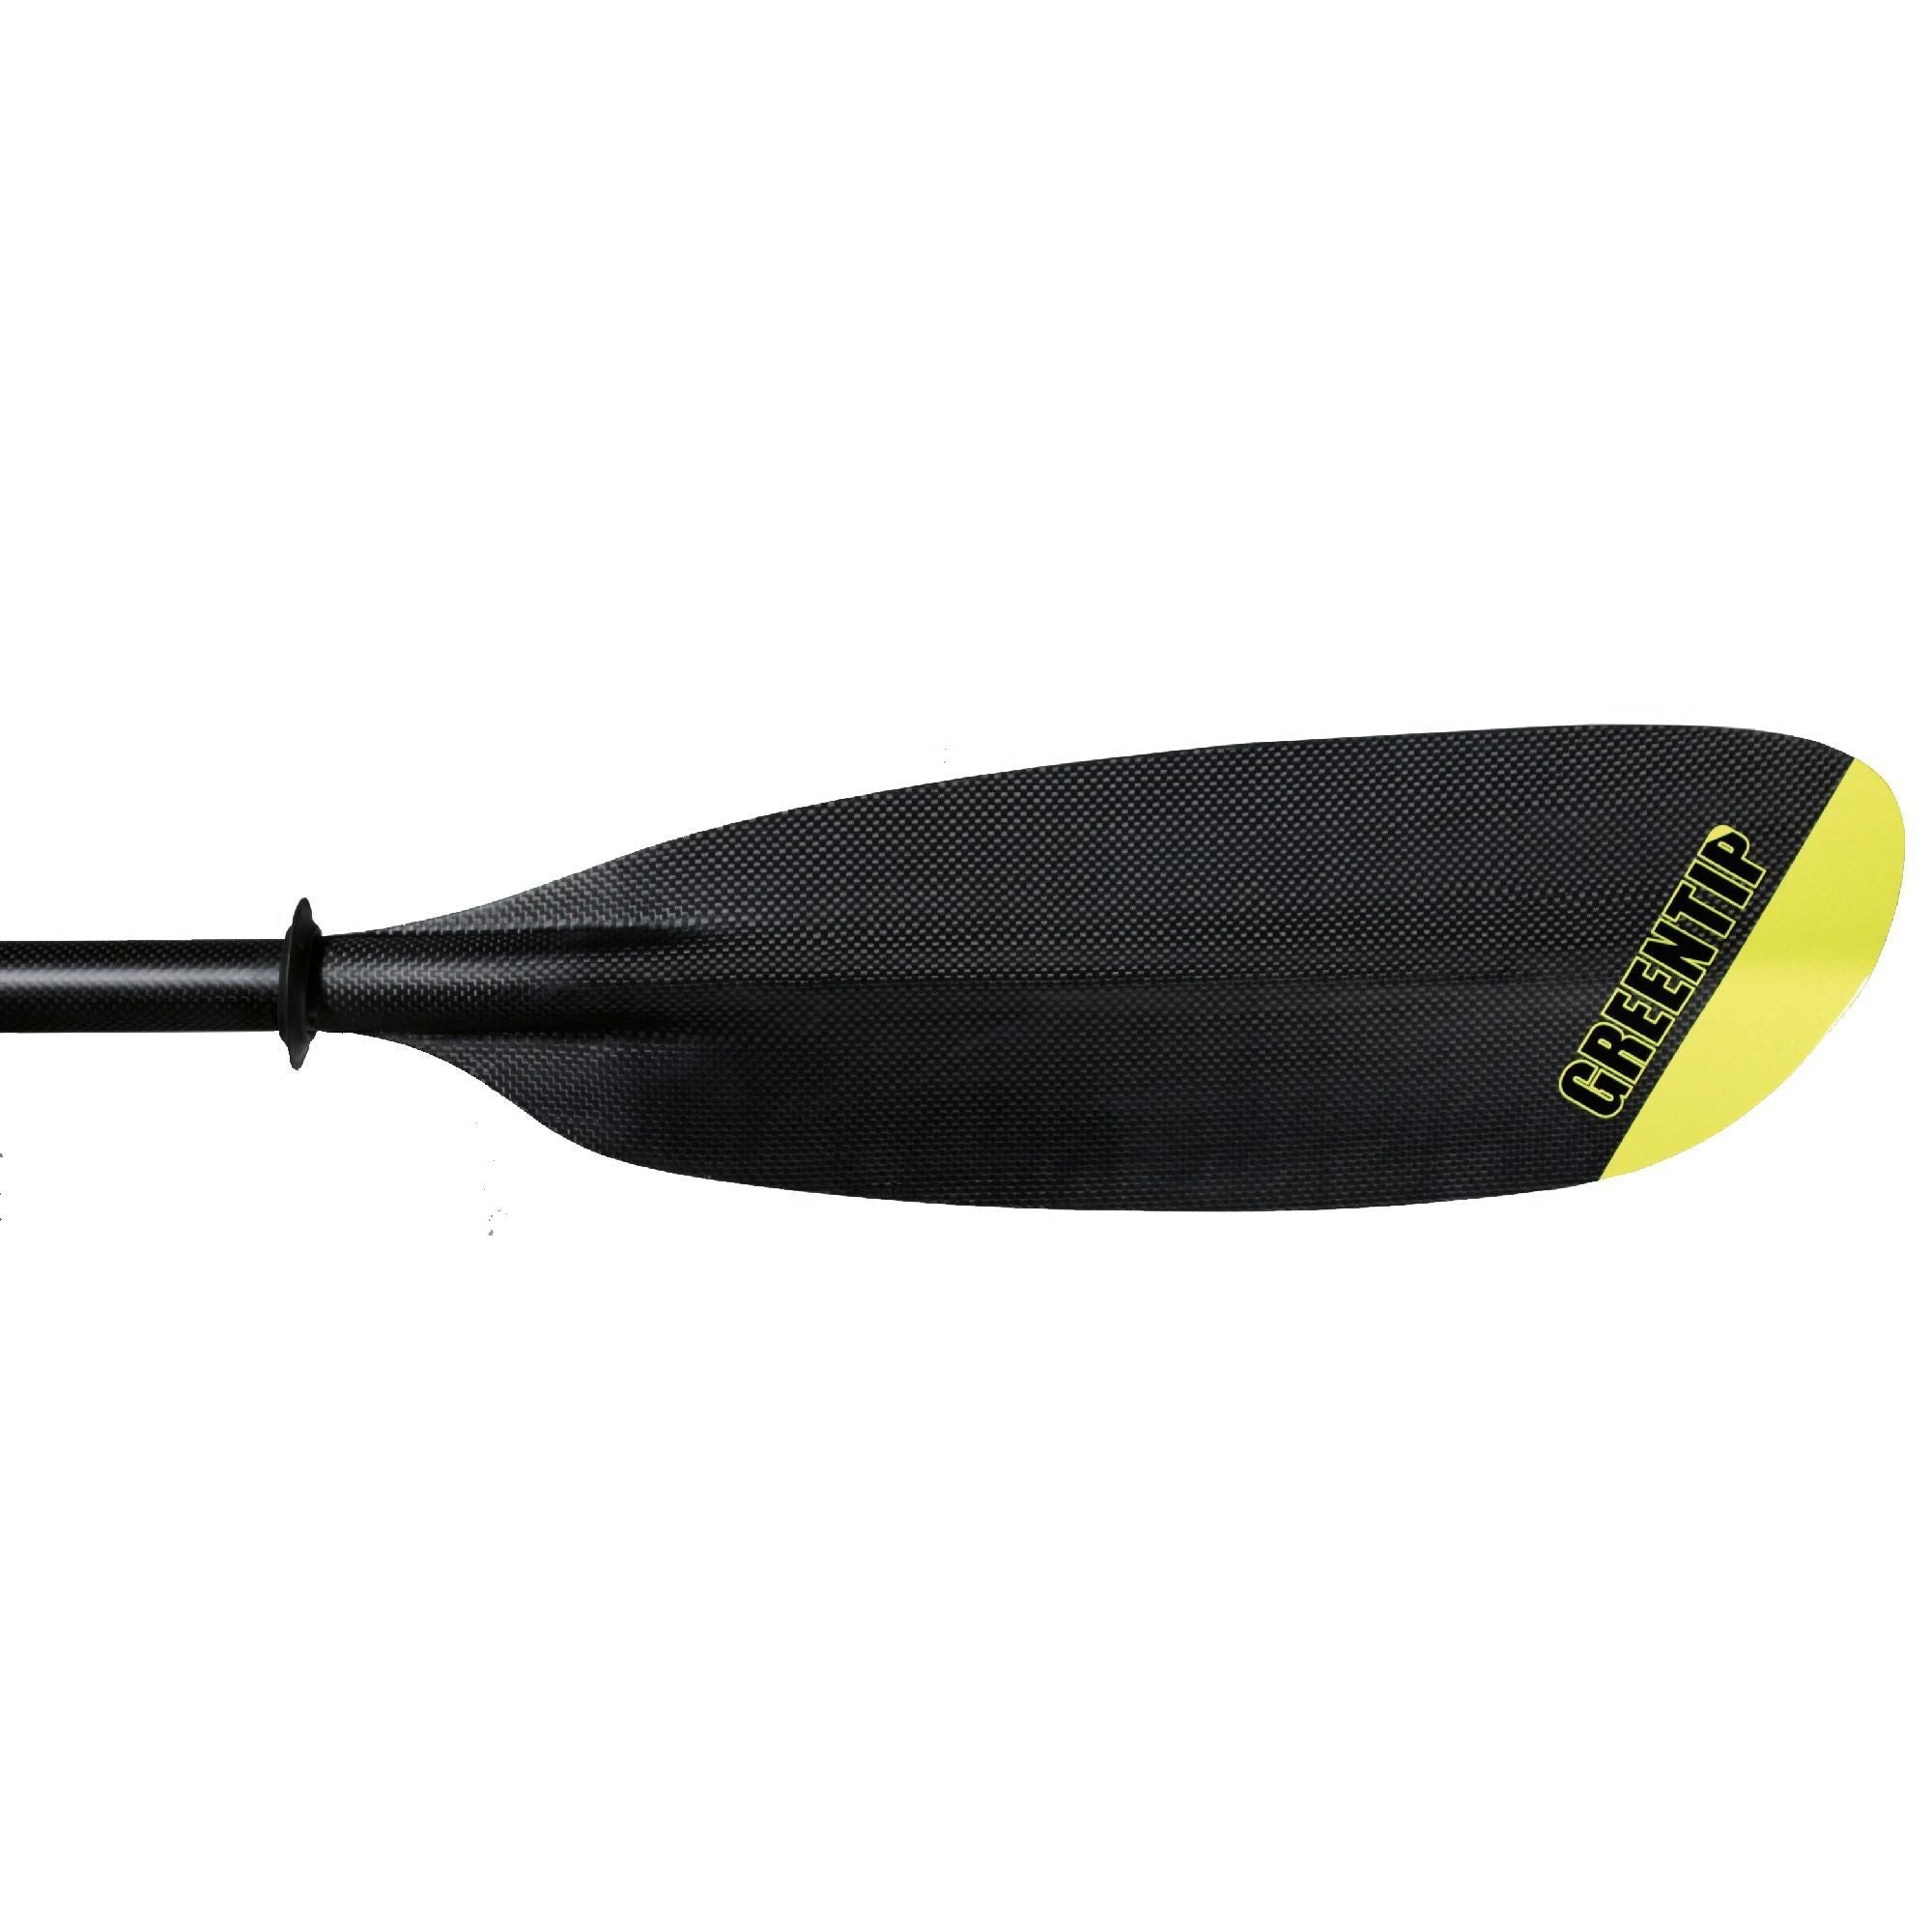 Greentip Bow Touring Paddle, Carbon